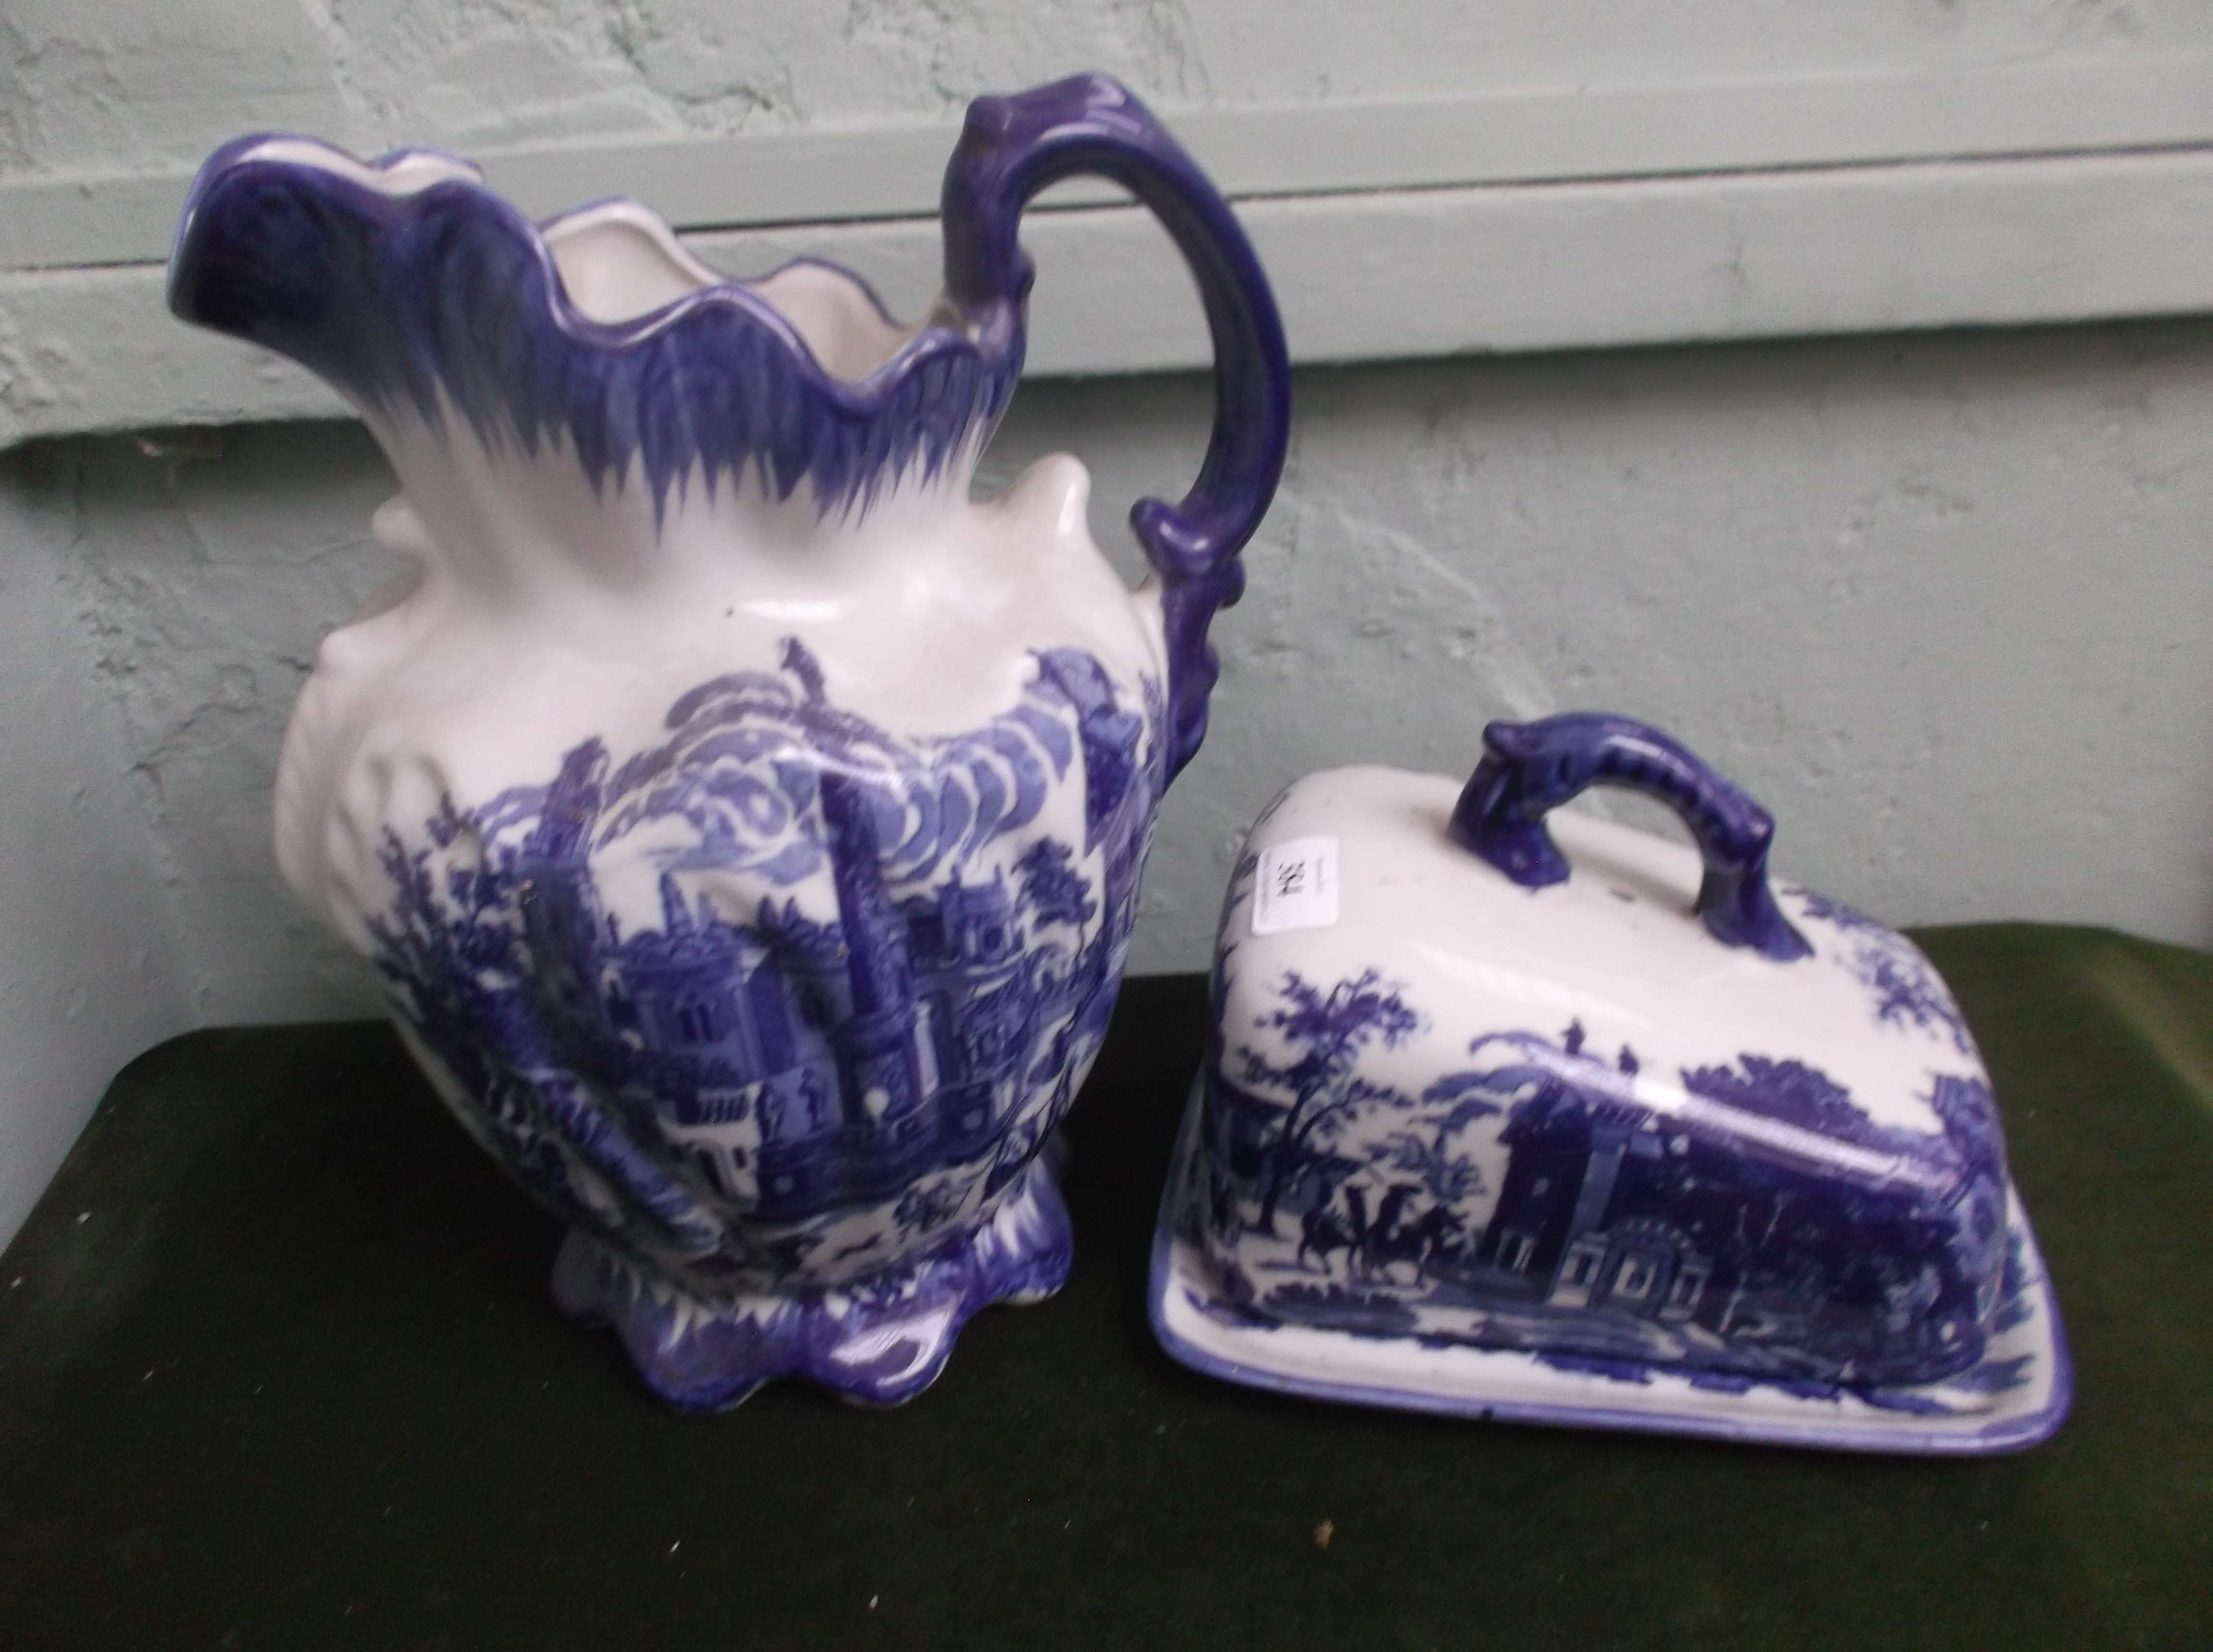 Vivid blue and white lidded cheese dish and toilet jug in similar style